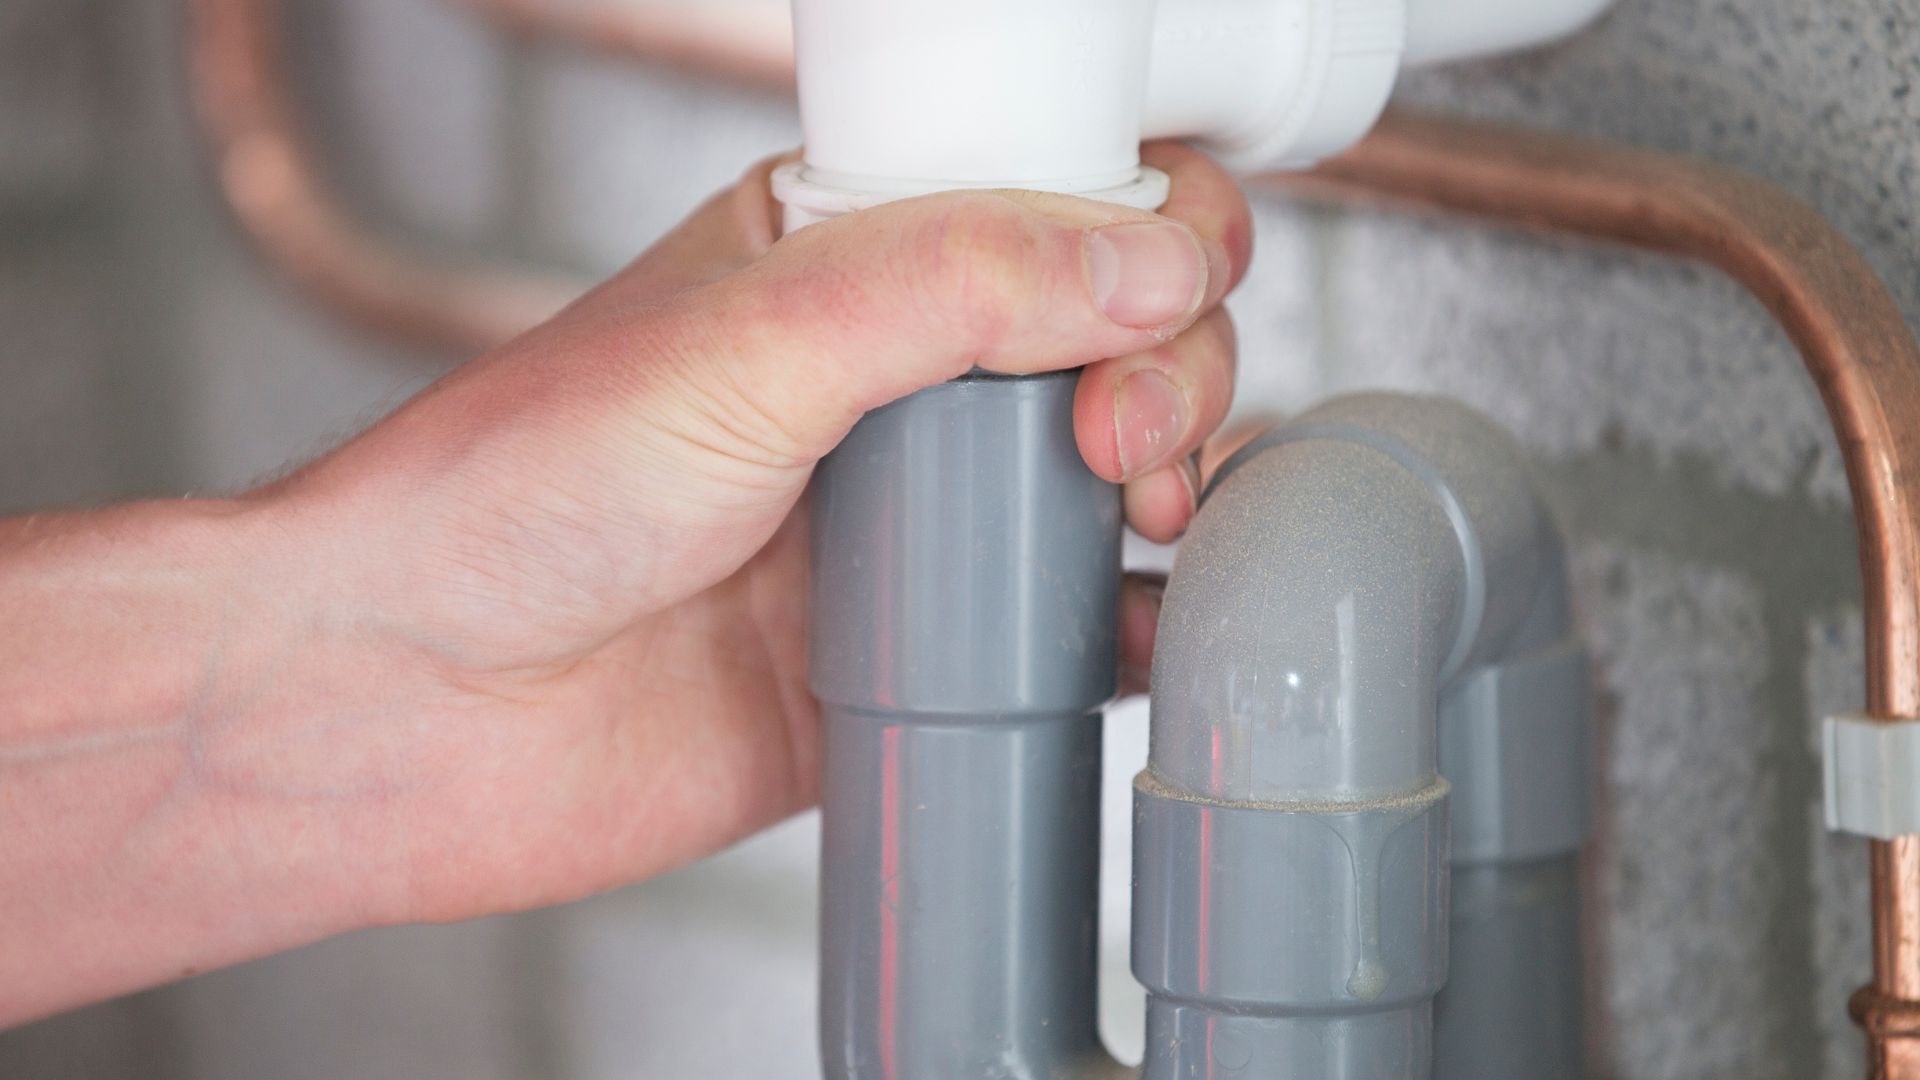 Opt for environmentally friendly cleaning products when maintaining your plumbing system.